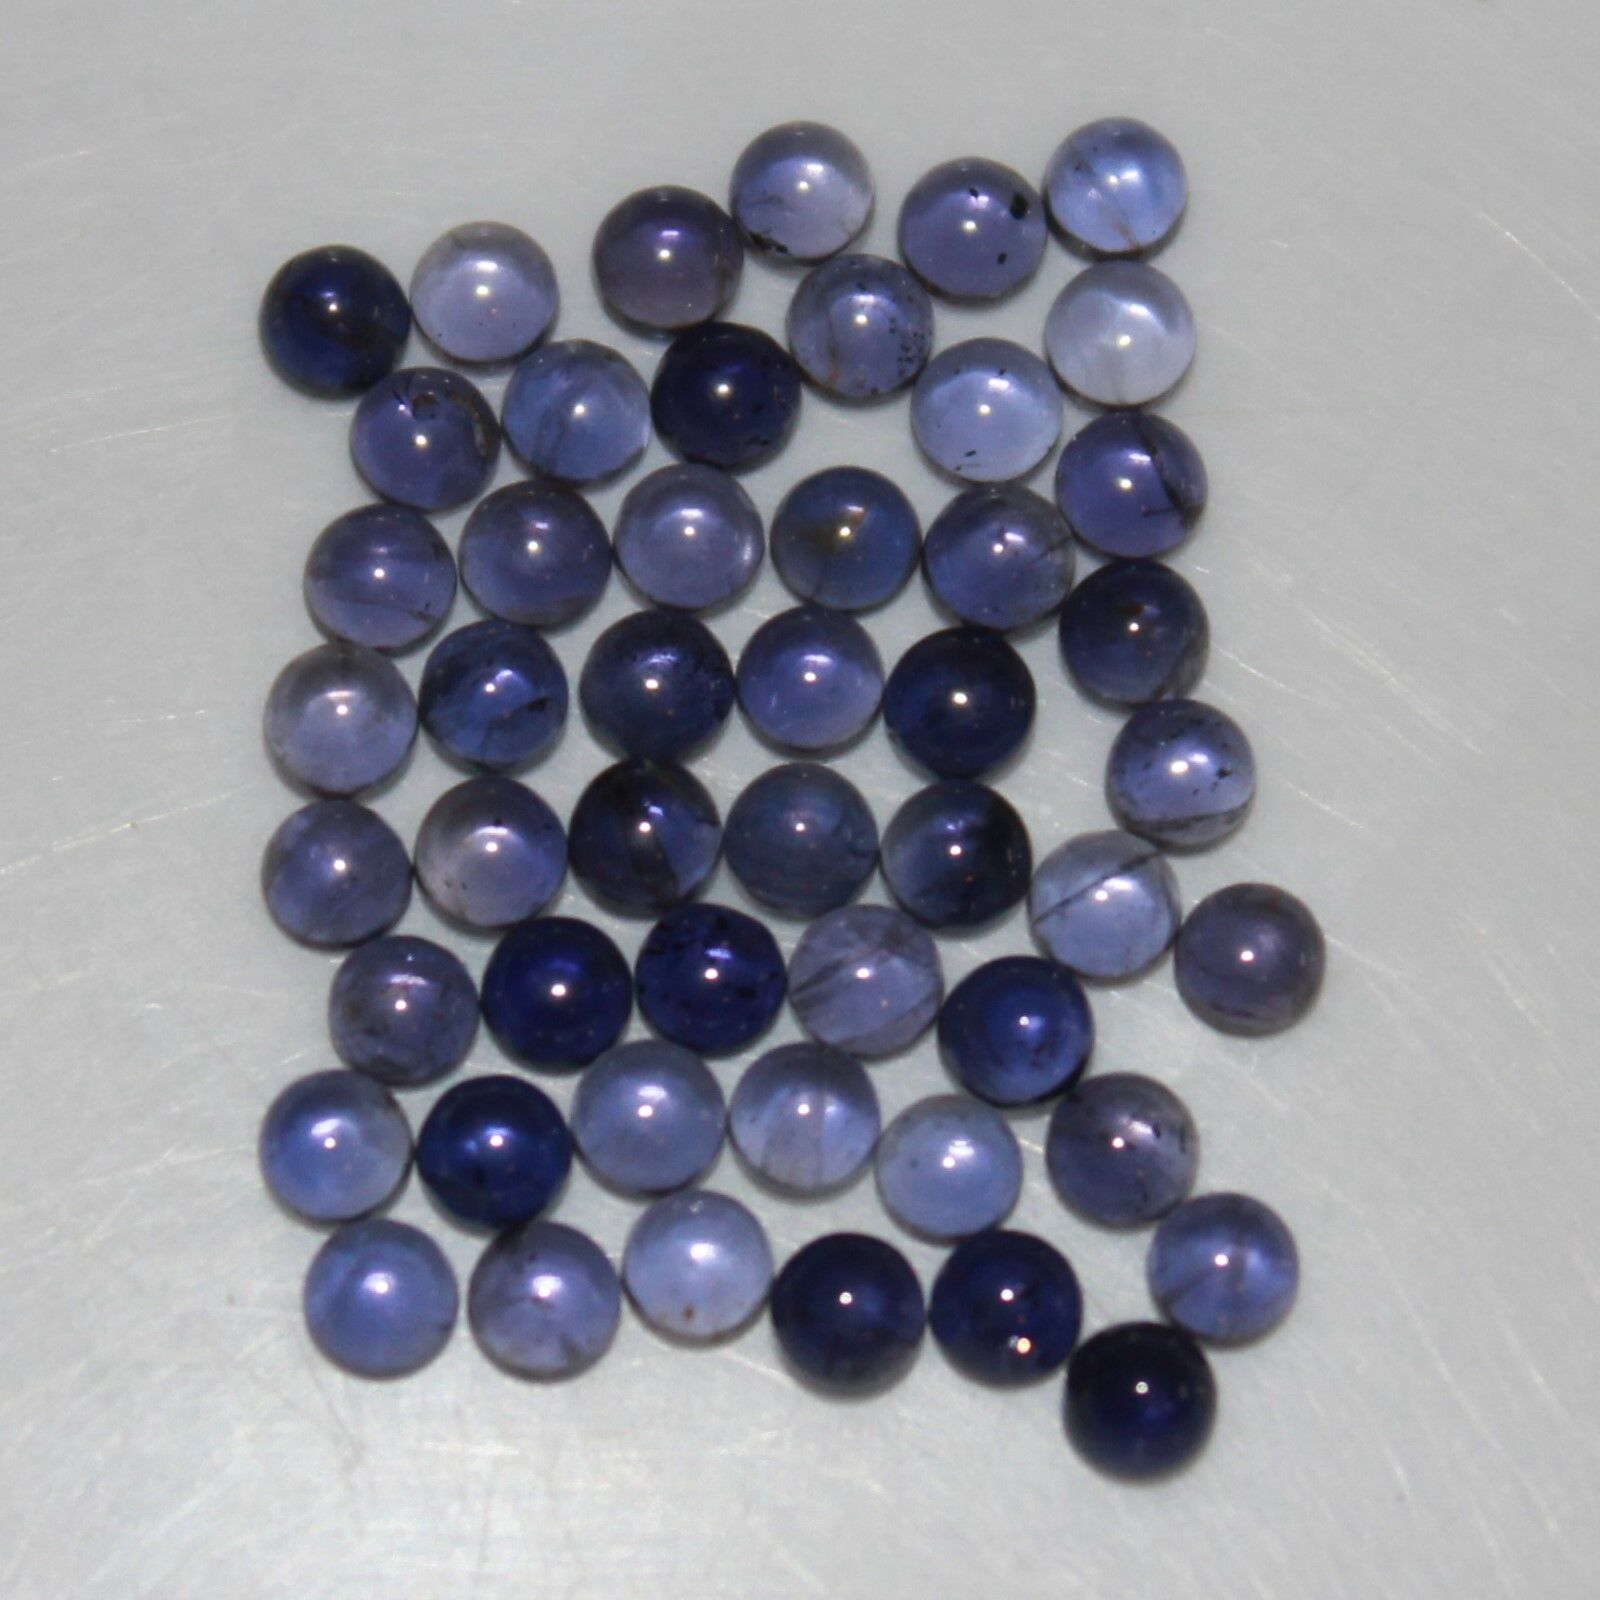 Iolite 3mm Cabochon Round Loose Gemstones With Multi-qty Discounts